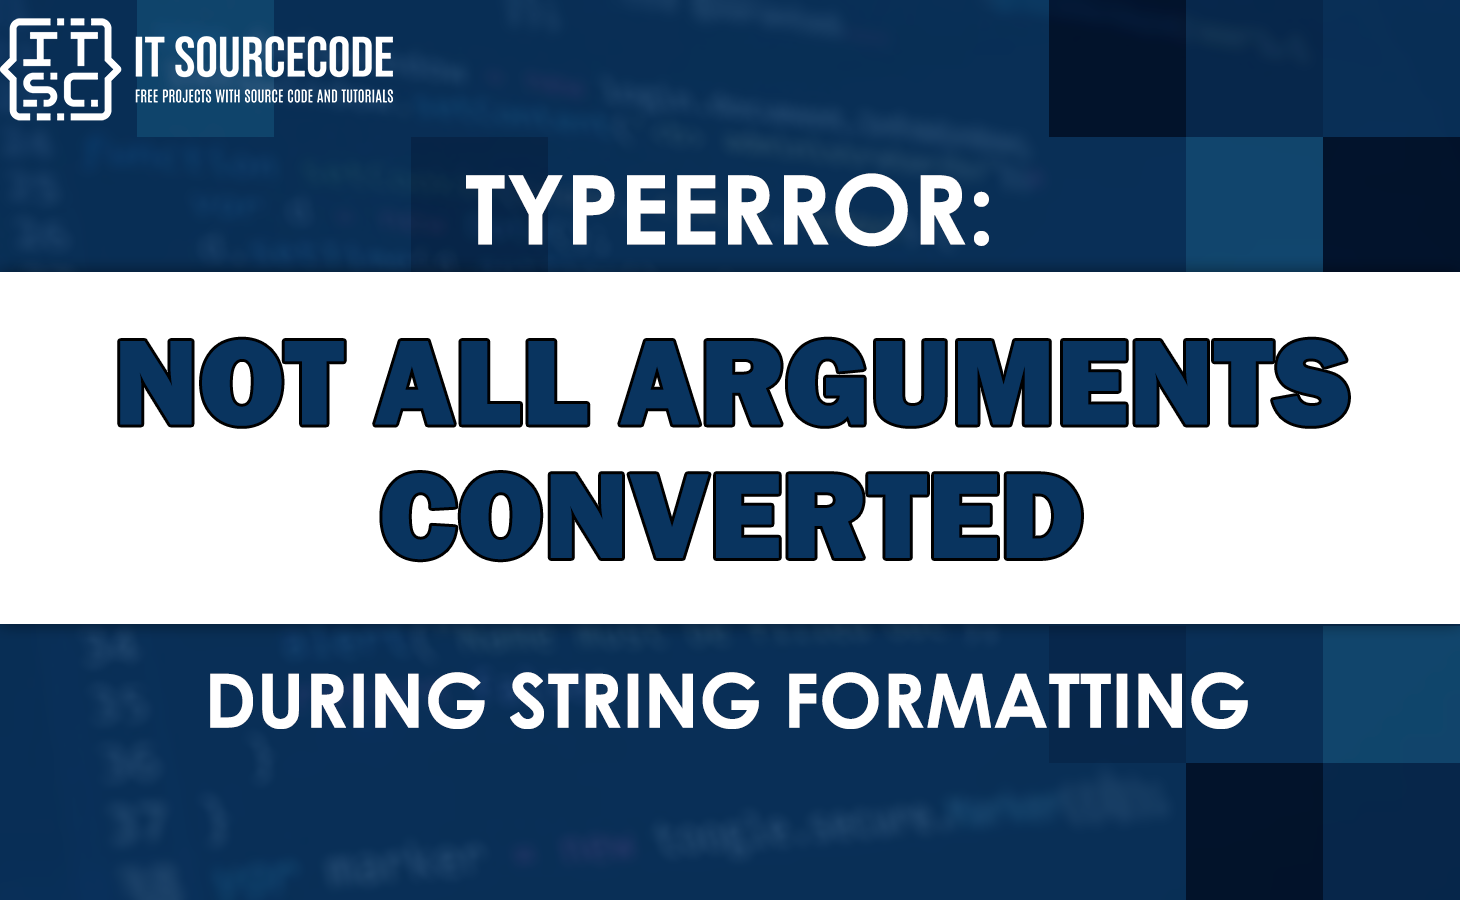 Not all arguments converted during string formatting [FIXED]